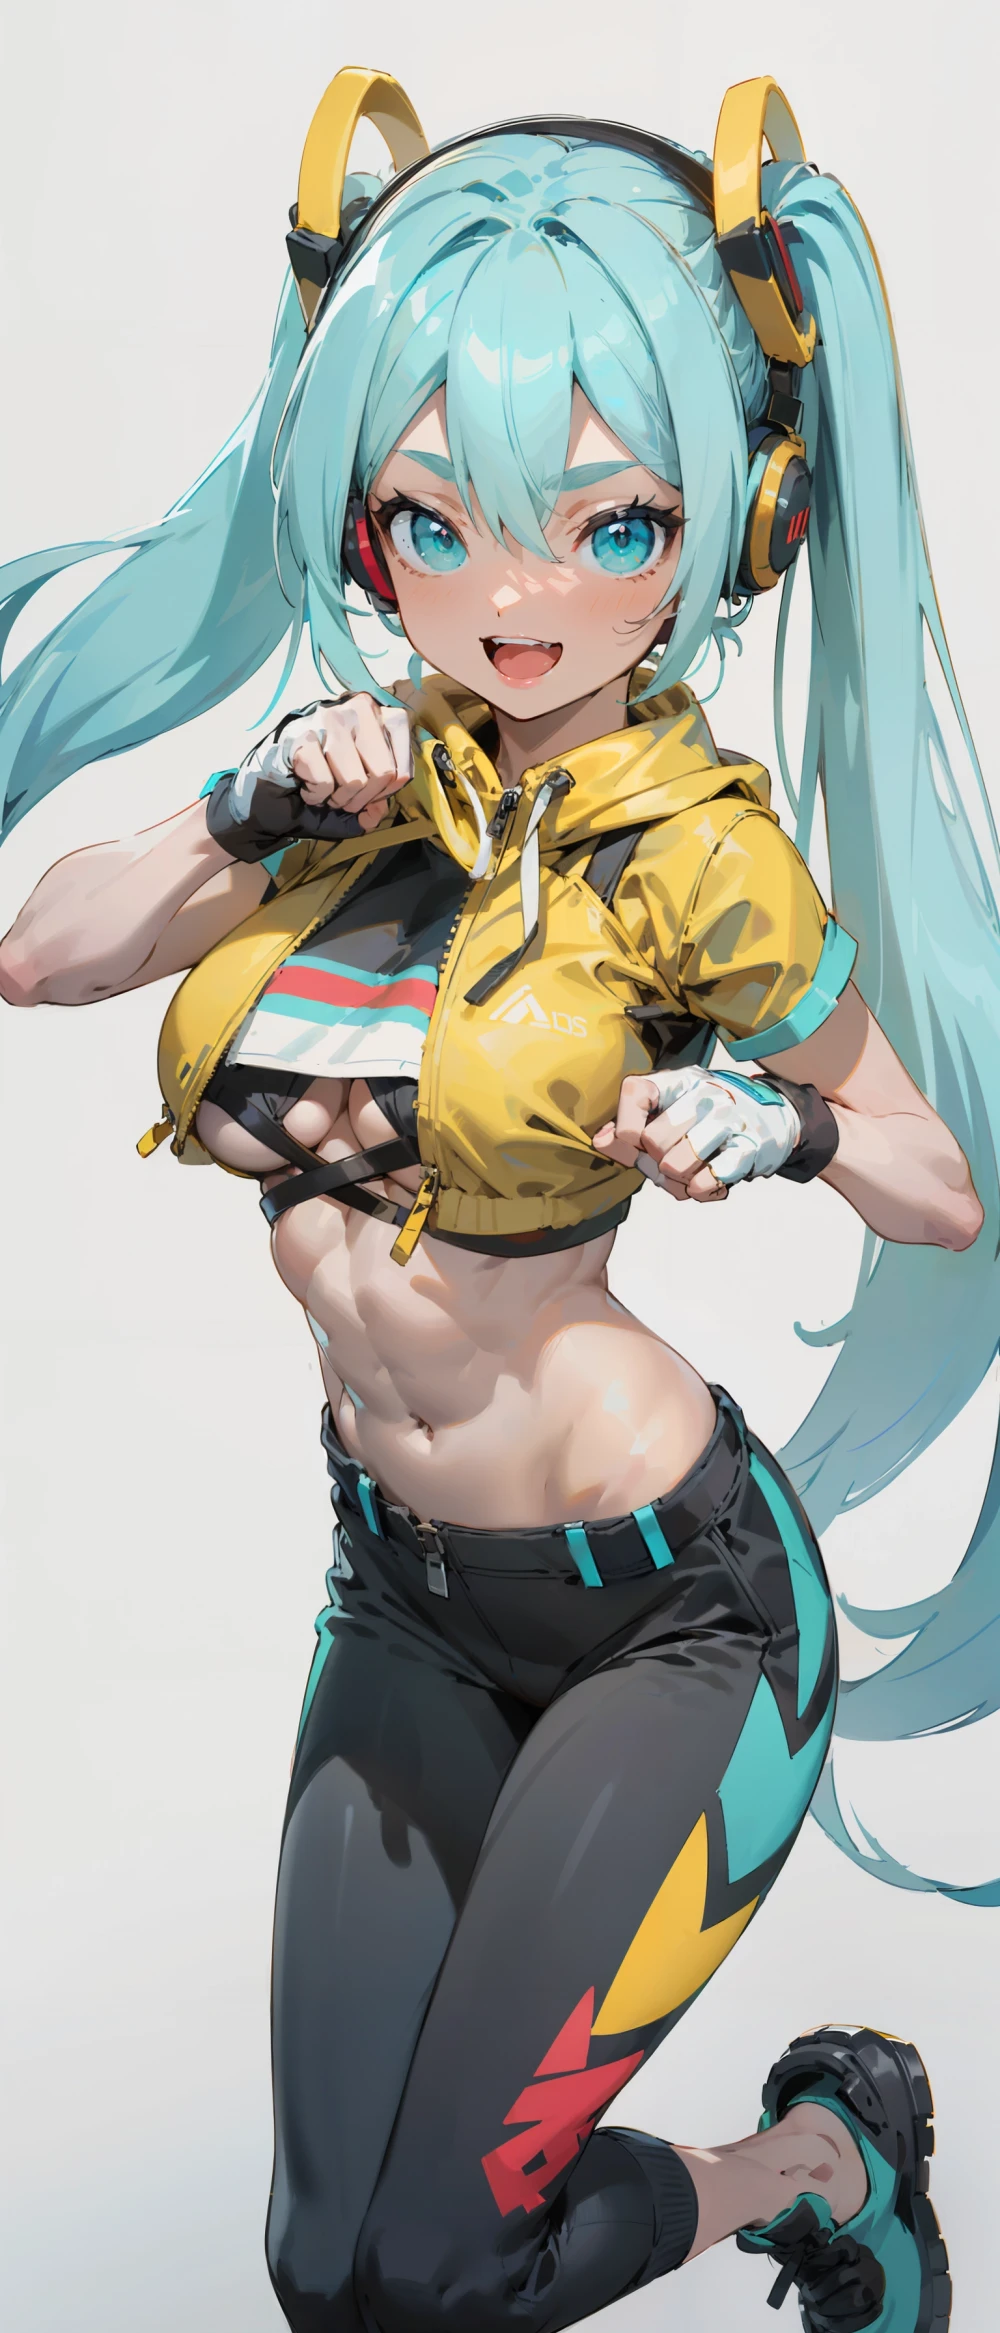 hatsune-miku-anime-style-all-ages-2-35